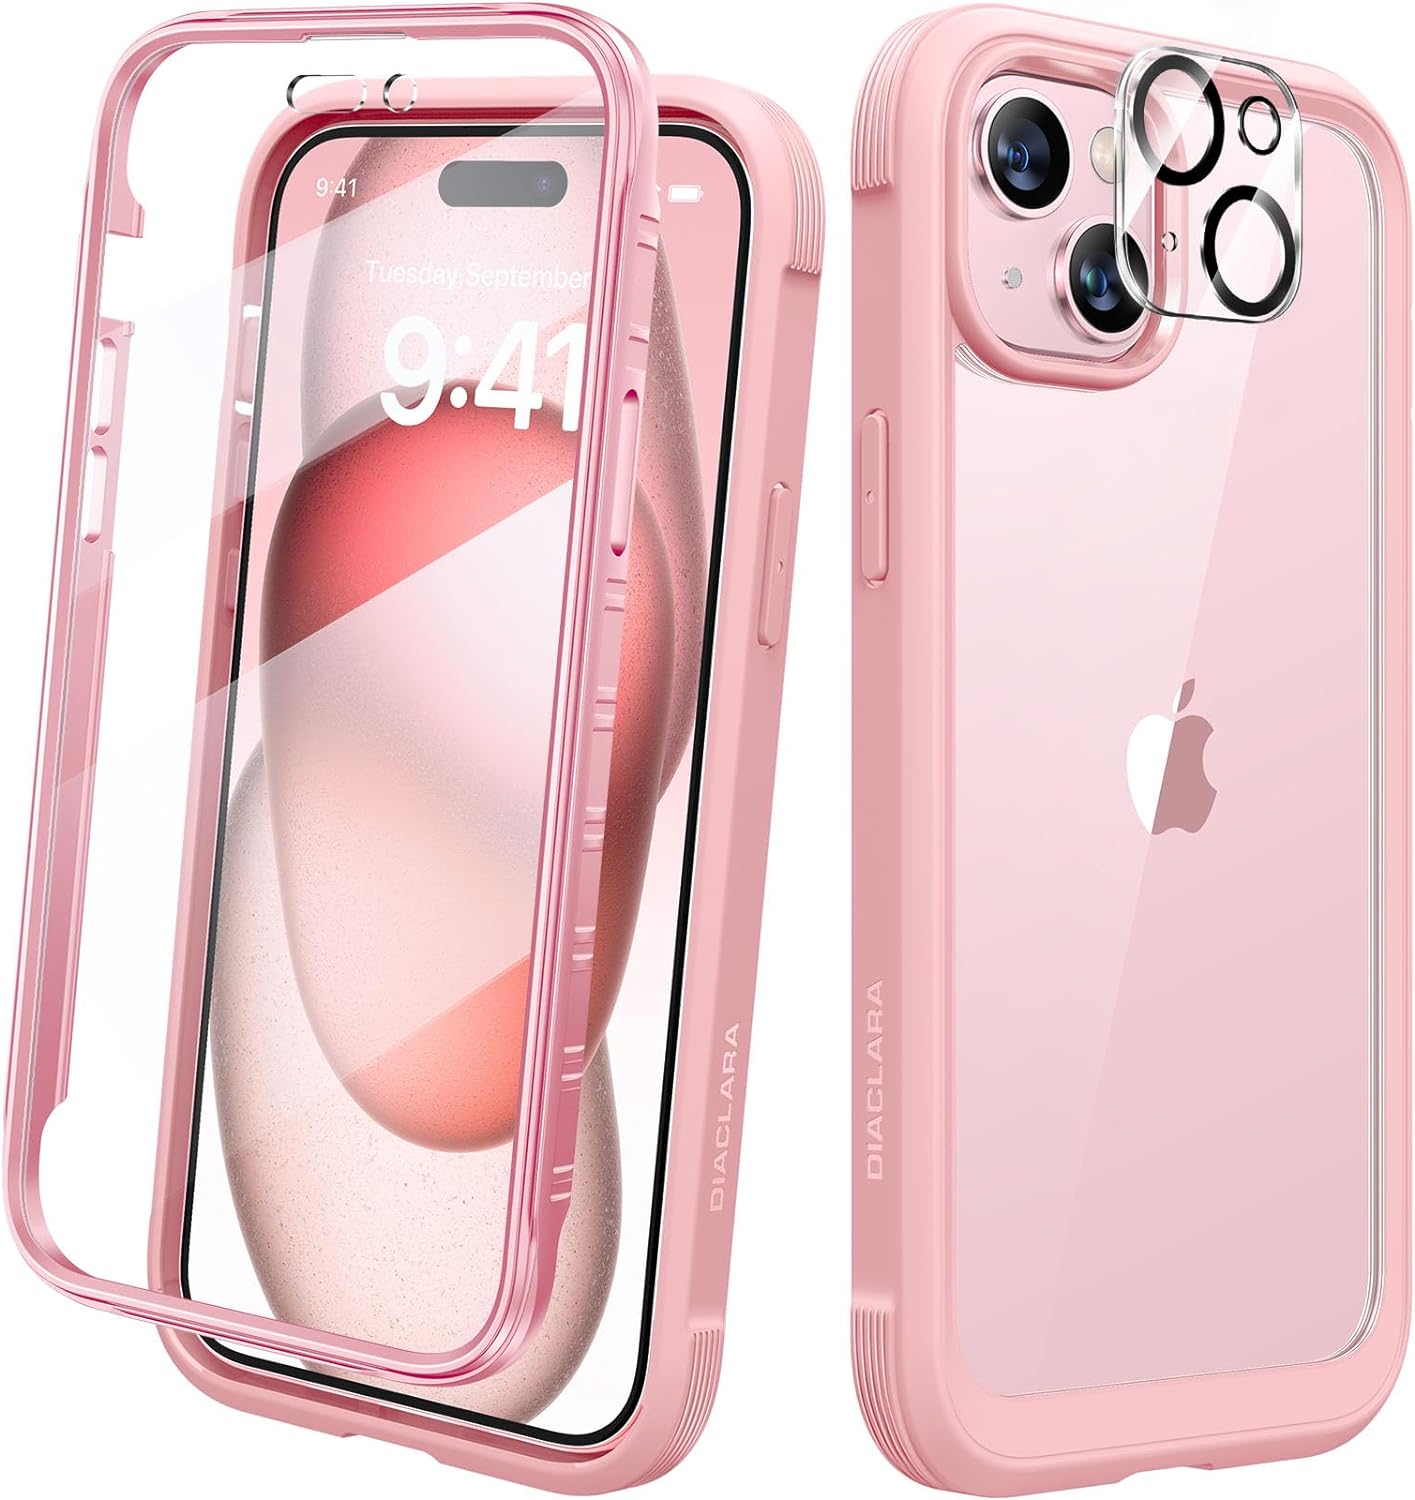 Limited-Time Specials: Diaclara Designed for iPhone 15 Case - Save 60%!